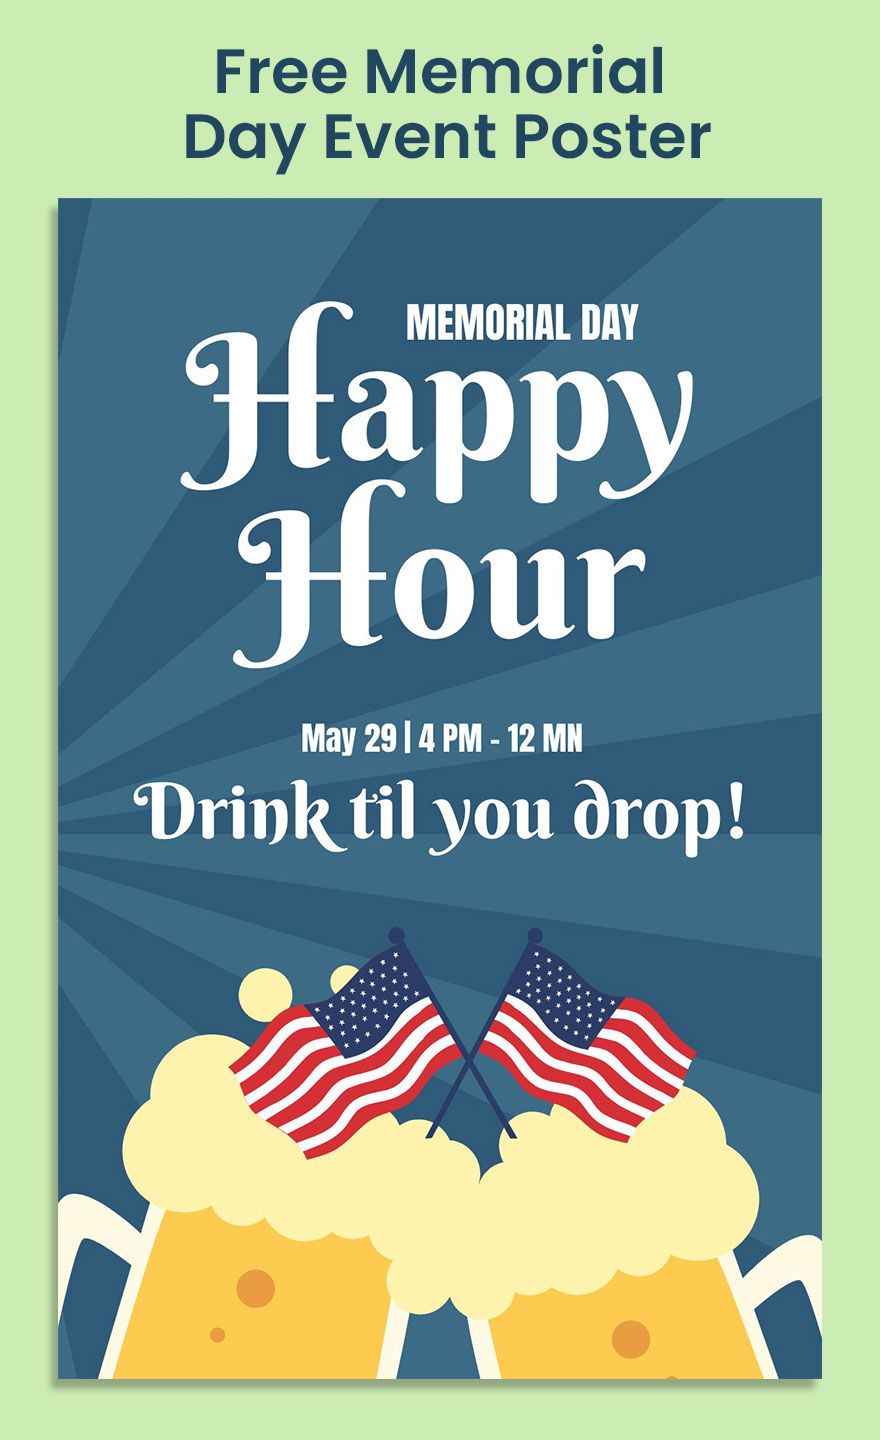 Free Memorial Day Event Poster